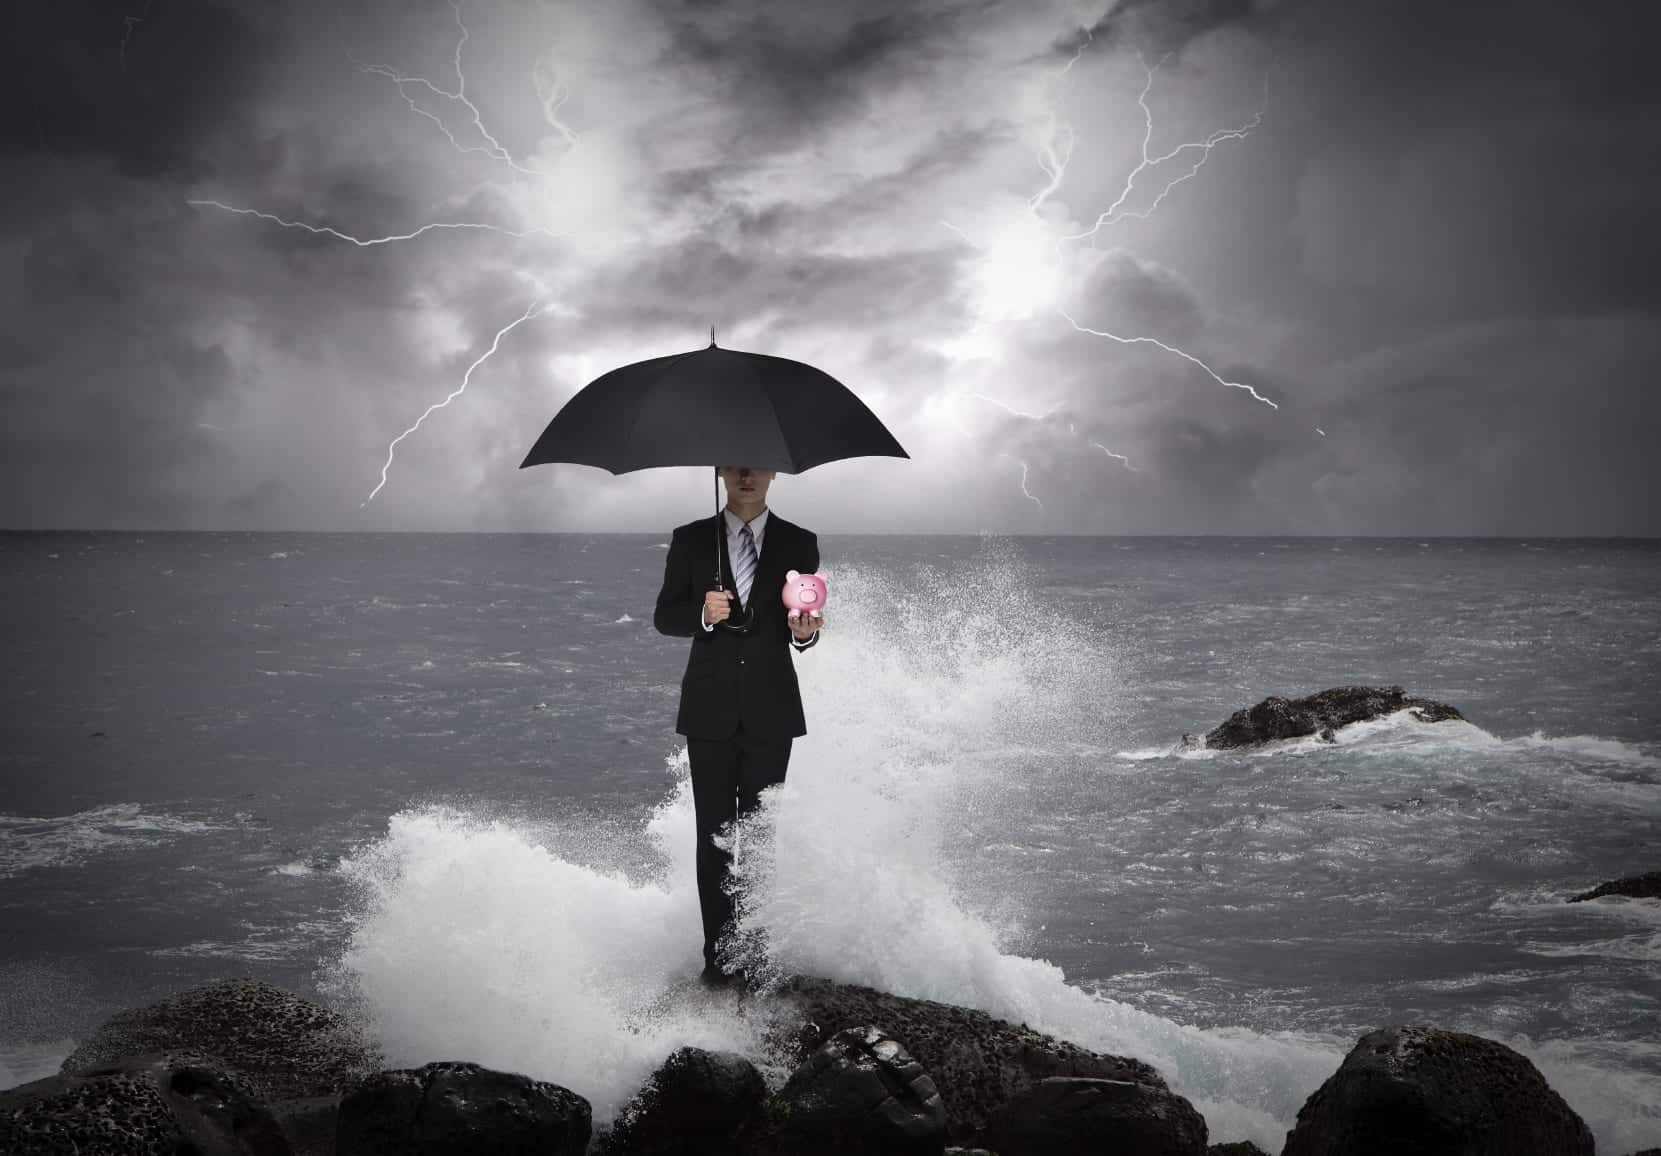 5 Unexpected Disasters That Can Bring a Small Business to It’s Knees